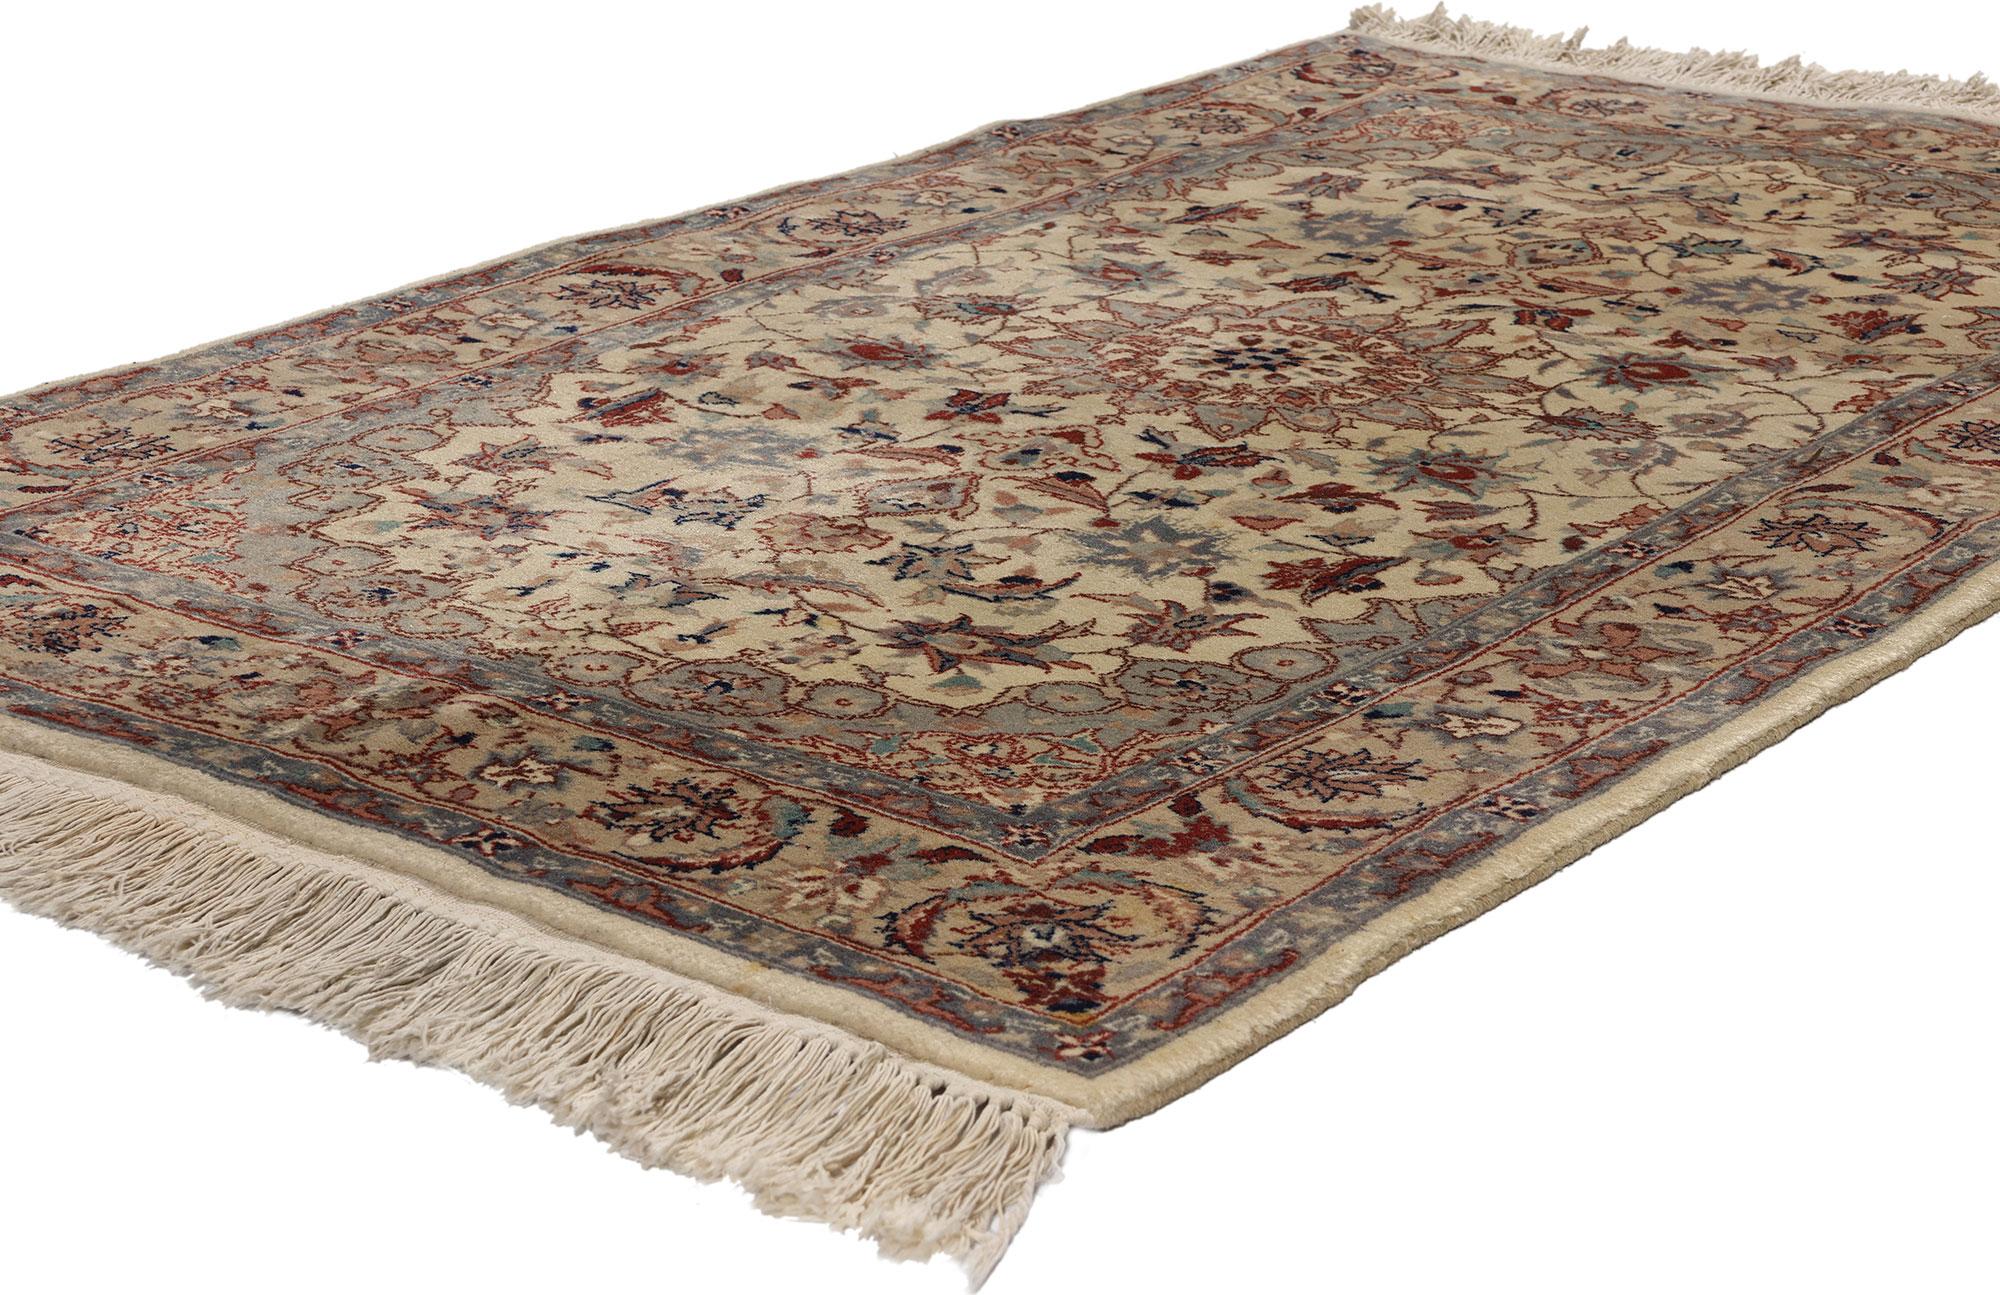 78694 Vintage Beige Chinese Tabriz Rug, 03'01 x 05'01. Introducing a timeless masterpiece of craftsmanship, this small vintage Chinese Tabriz rug embodies classic elegance with its hand-knotted wool construction. The focal point of this exquisite